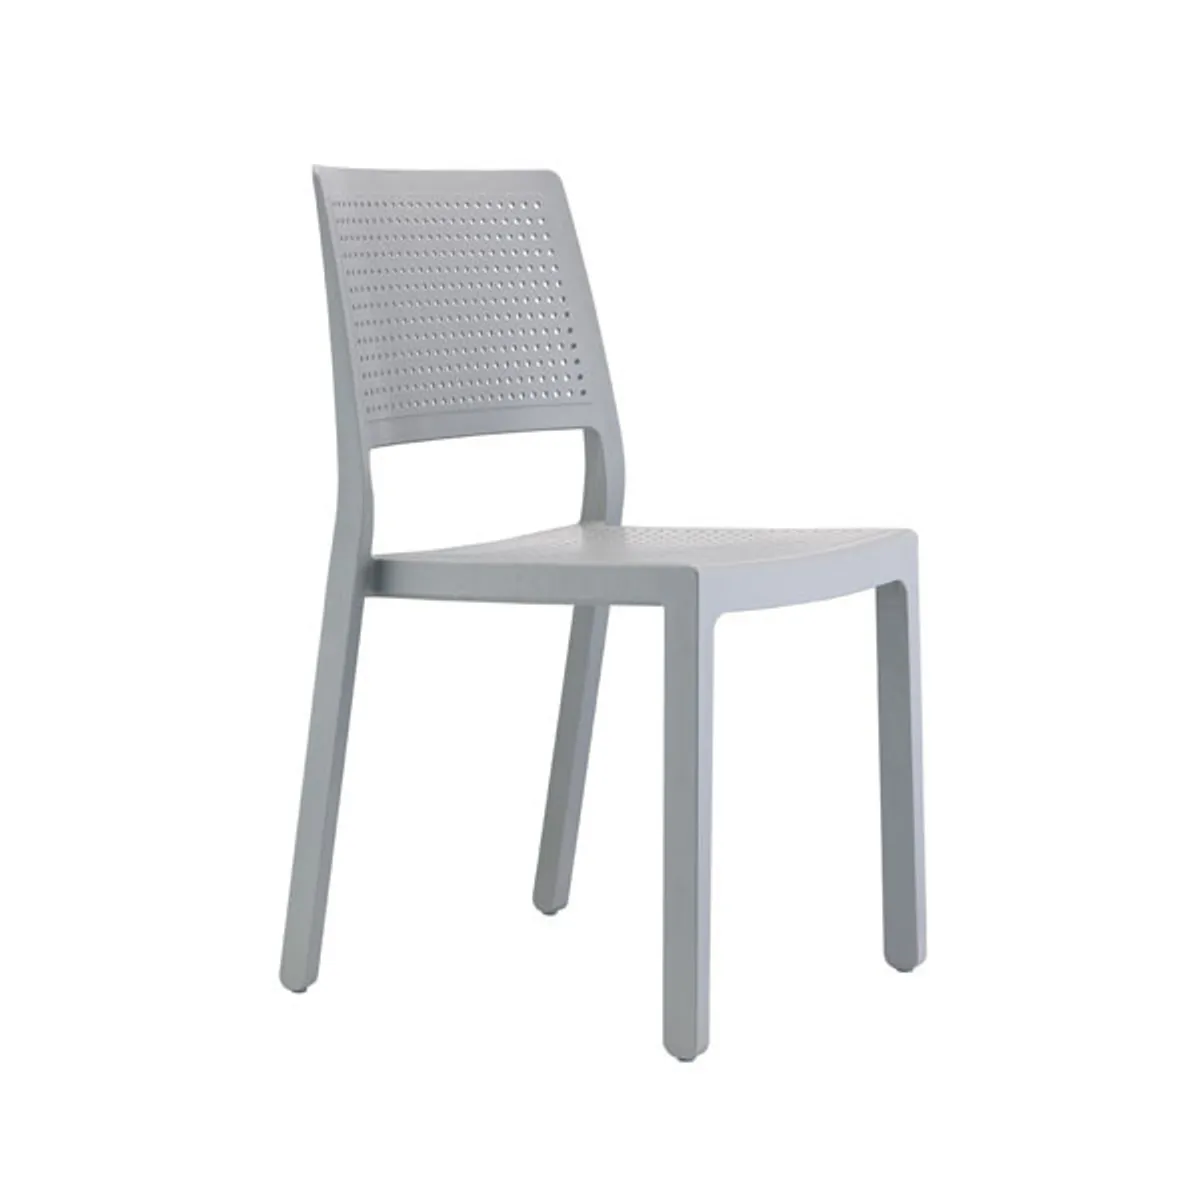 Remi dot side chair 4 Inside Out Contracts